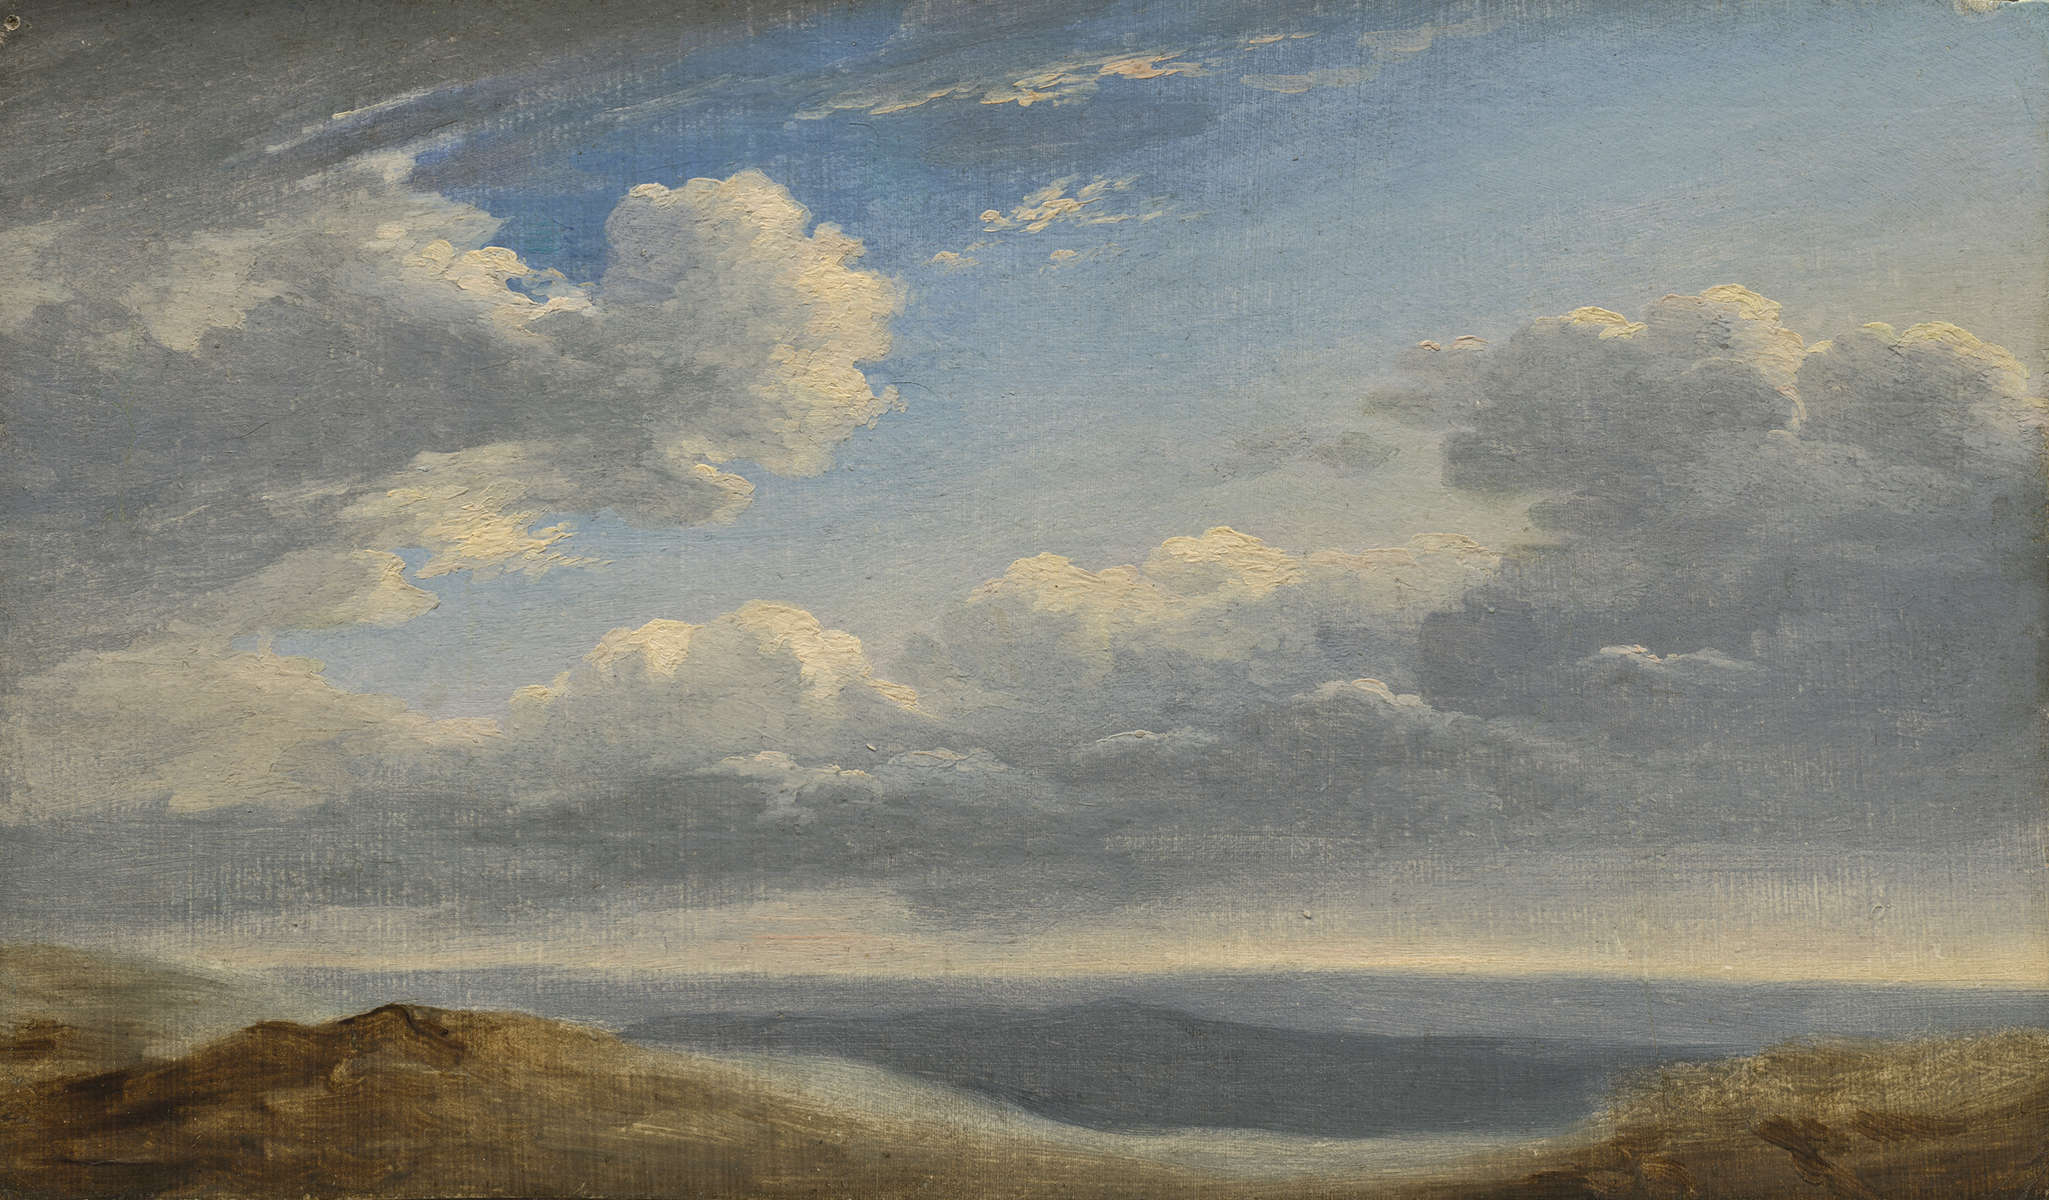 Pierre-Henri de Valenciennes (French, 1750 - 1819 ), Study of Clouds over the Roman Campagna, c. 1782/1785, oil on paper on cardboard, Given in honor of Gaillard F. Ravenel II by his friends